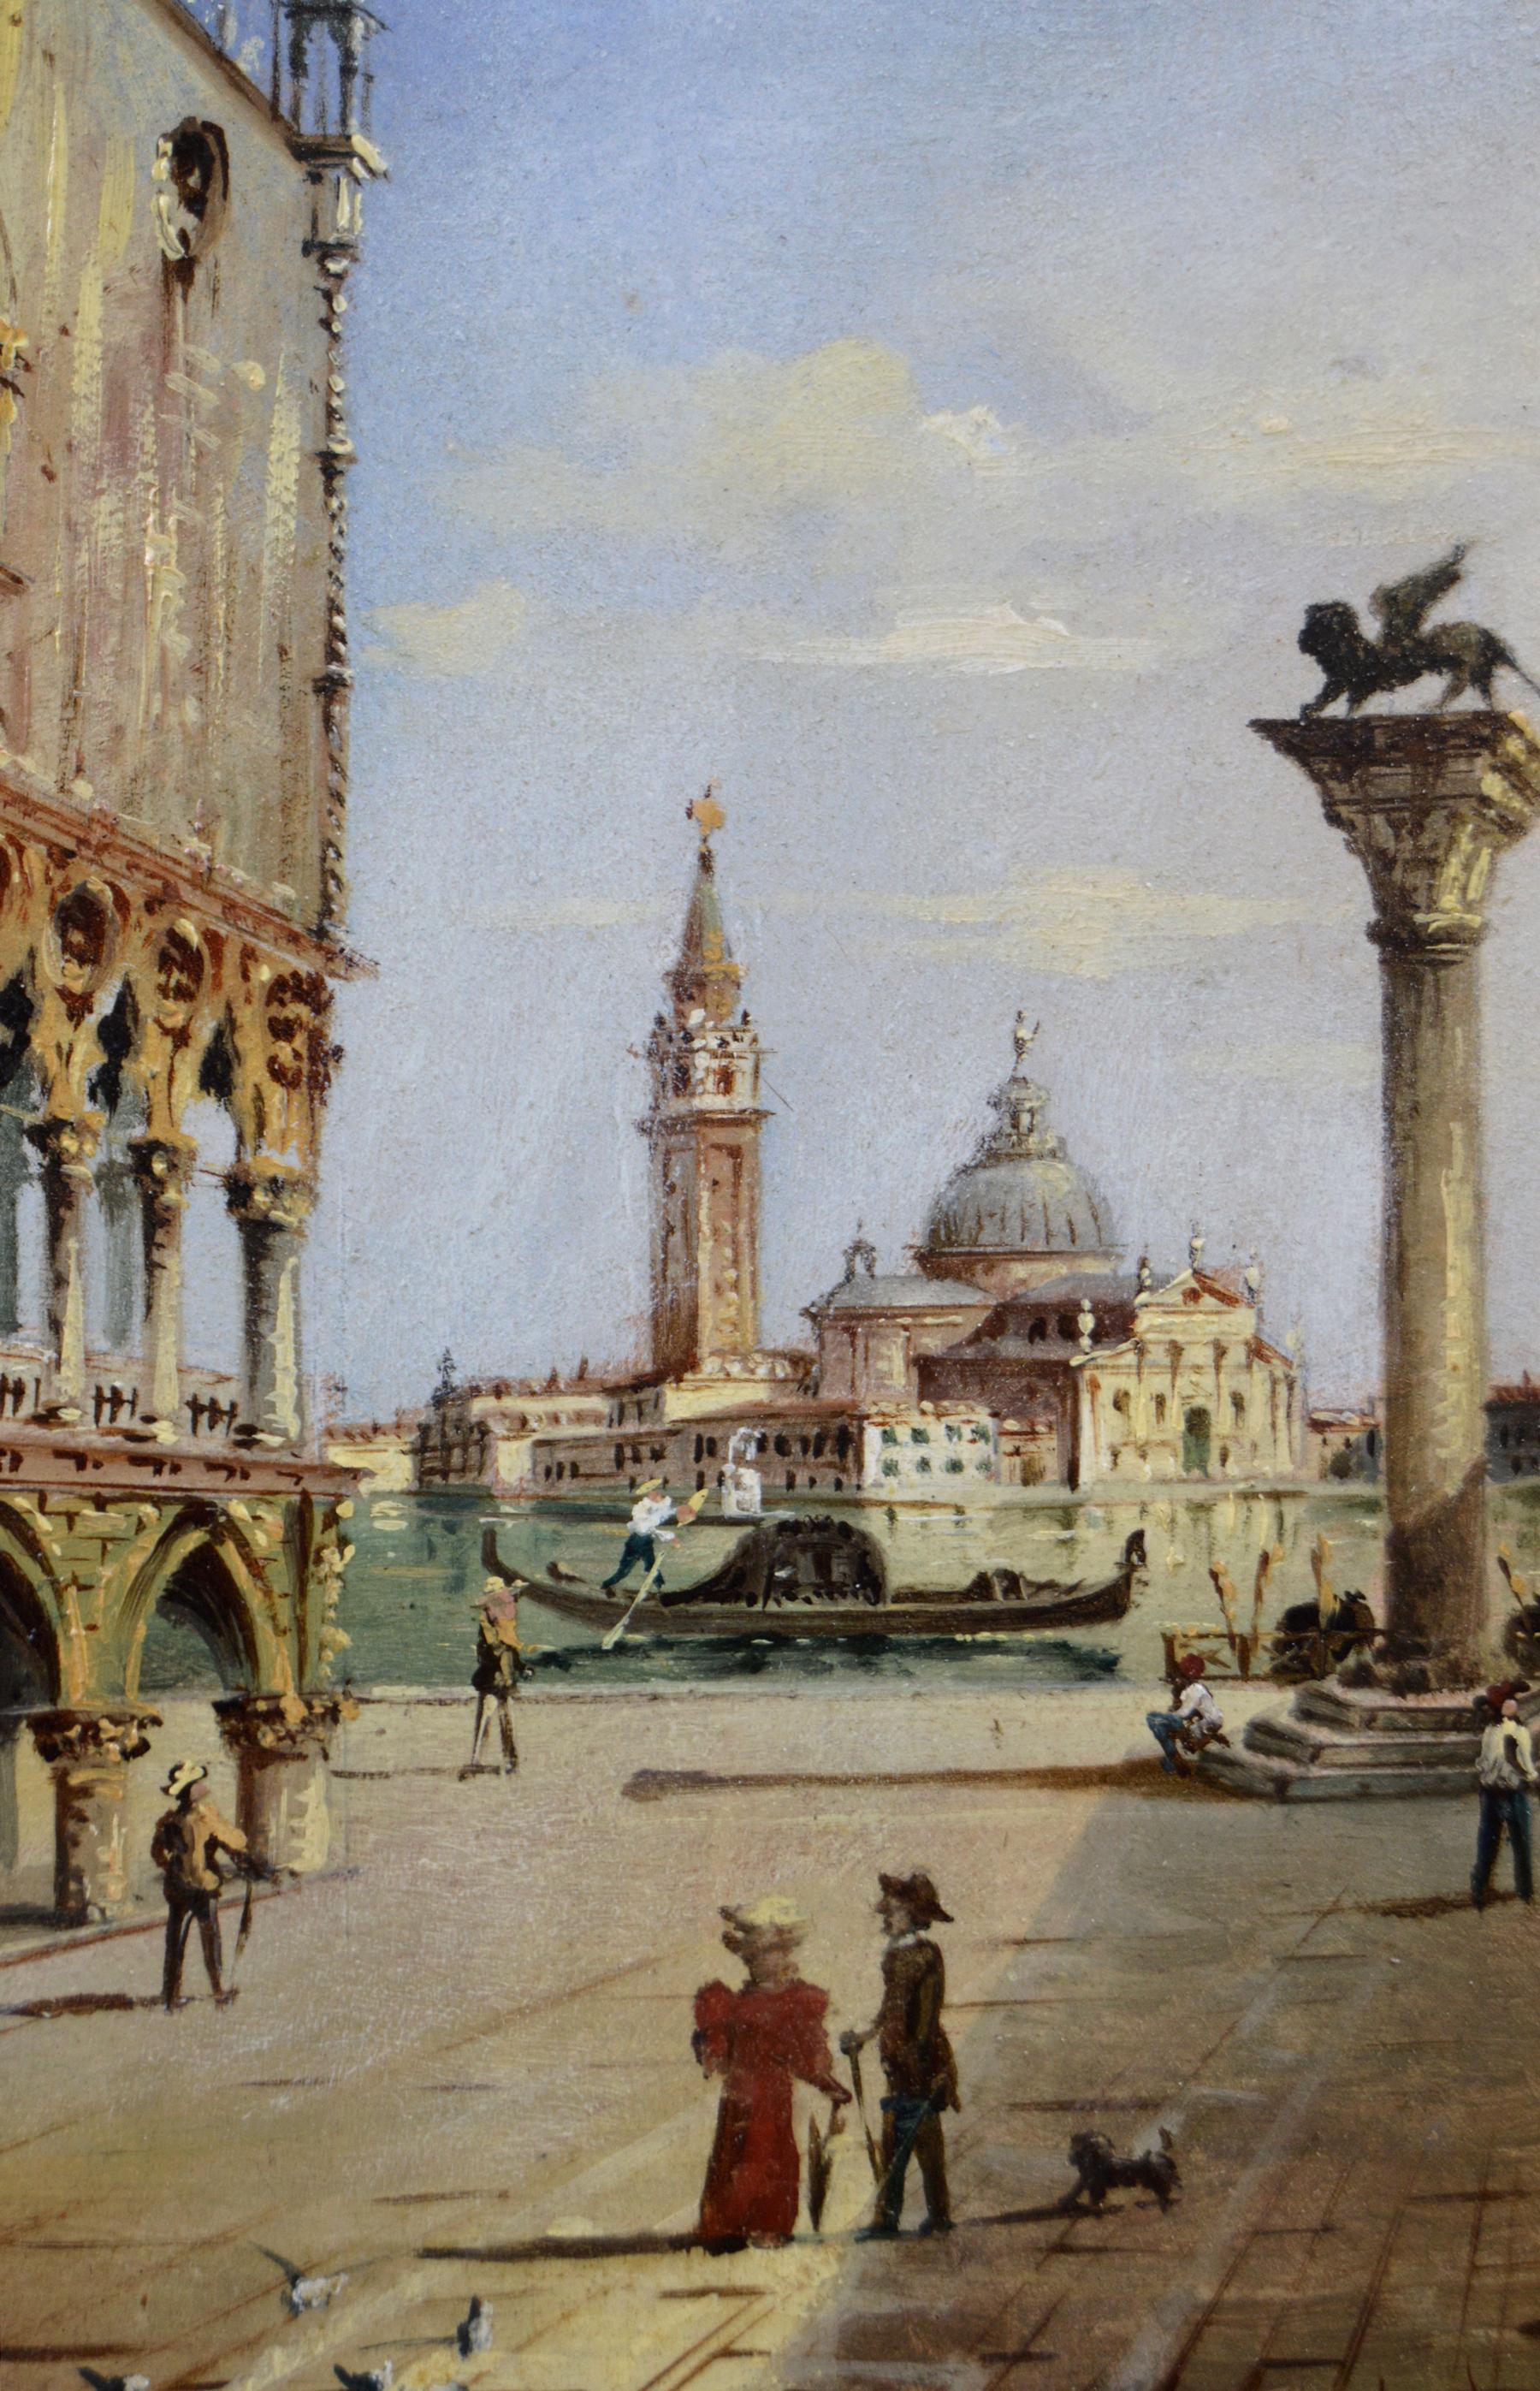 **PLEASE NOTE: EACH PAINTING INCLUDING THE FRAME MEASURES 15 INCHES X 10.5 INCHES**

Marco Grubas/Grubacs
Italian, (1839-1910)
The Doge’s Palace, Venice & Piazza San Marco, Venice 
Oil on panel, pair, both signed
Image size: 10 inches x 5.5 inches